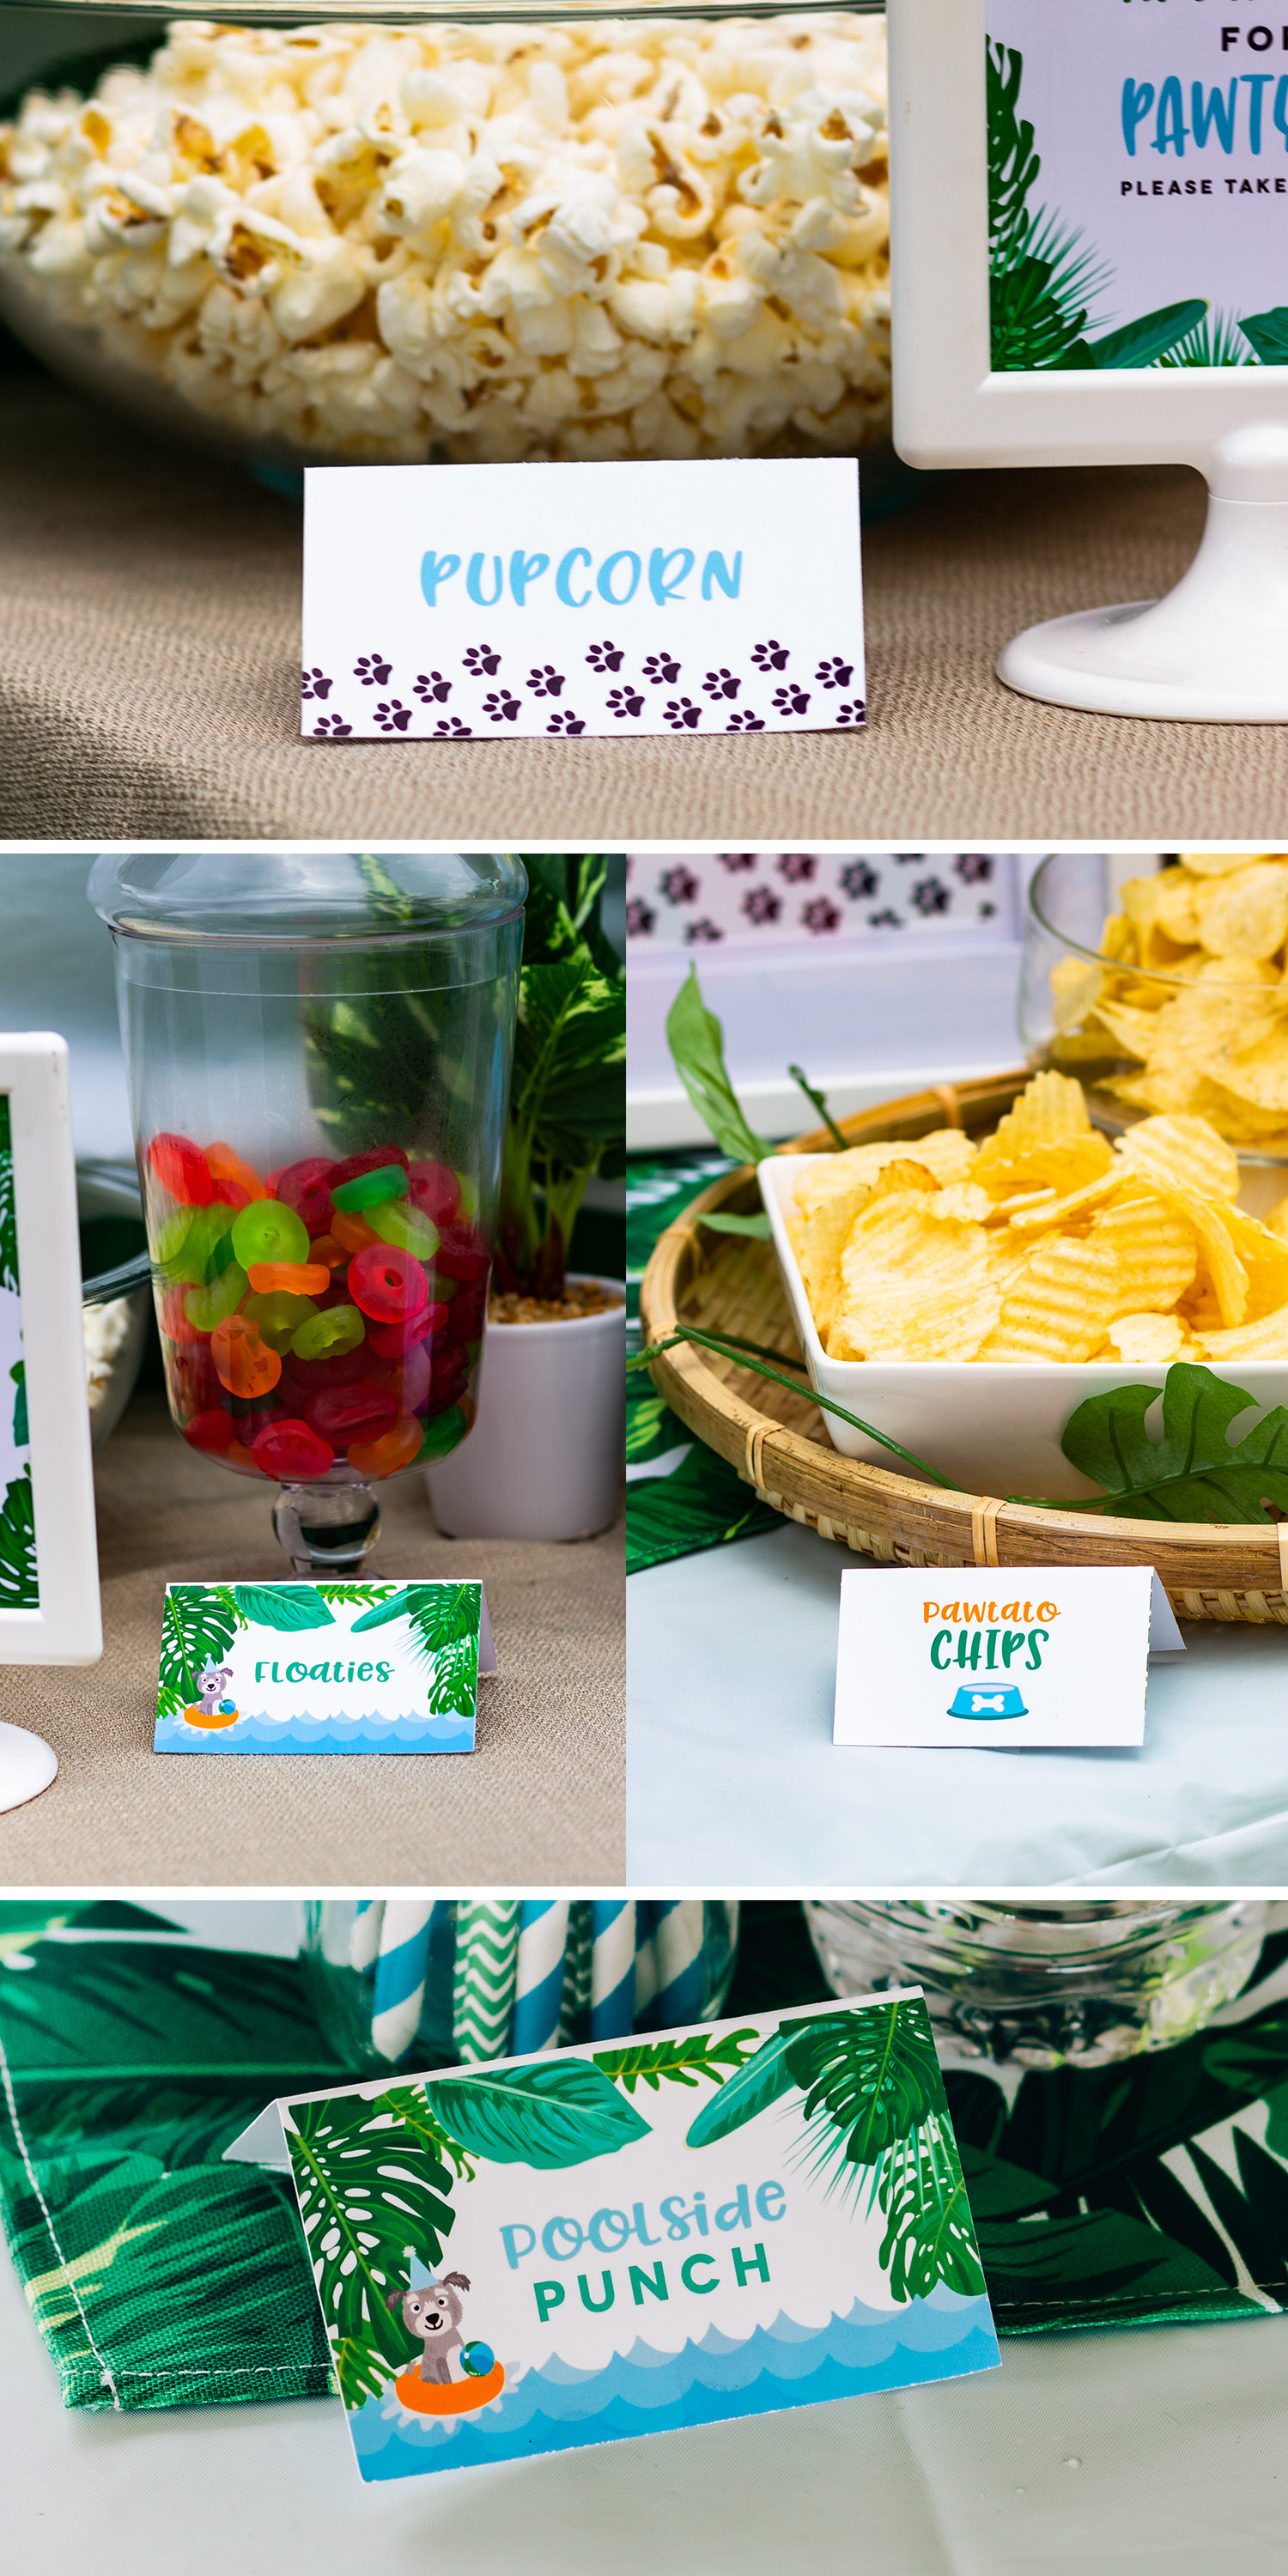 Puppy party food ideas - Pawtato Chips, Pupcorn, and more // mkkmdesigns